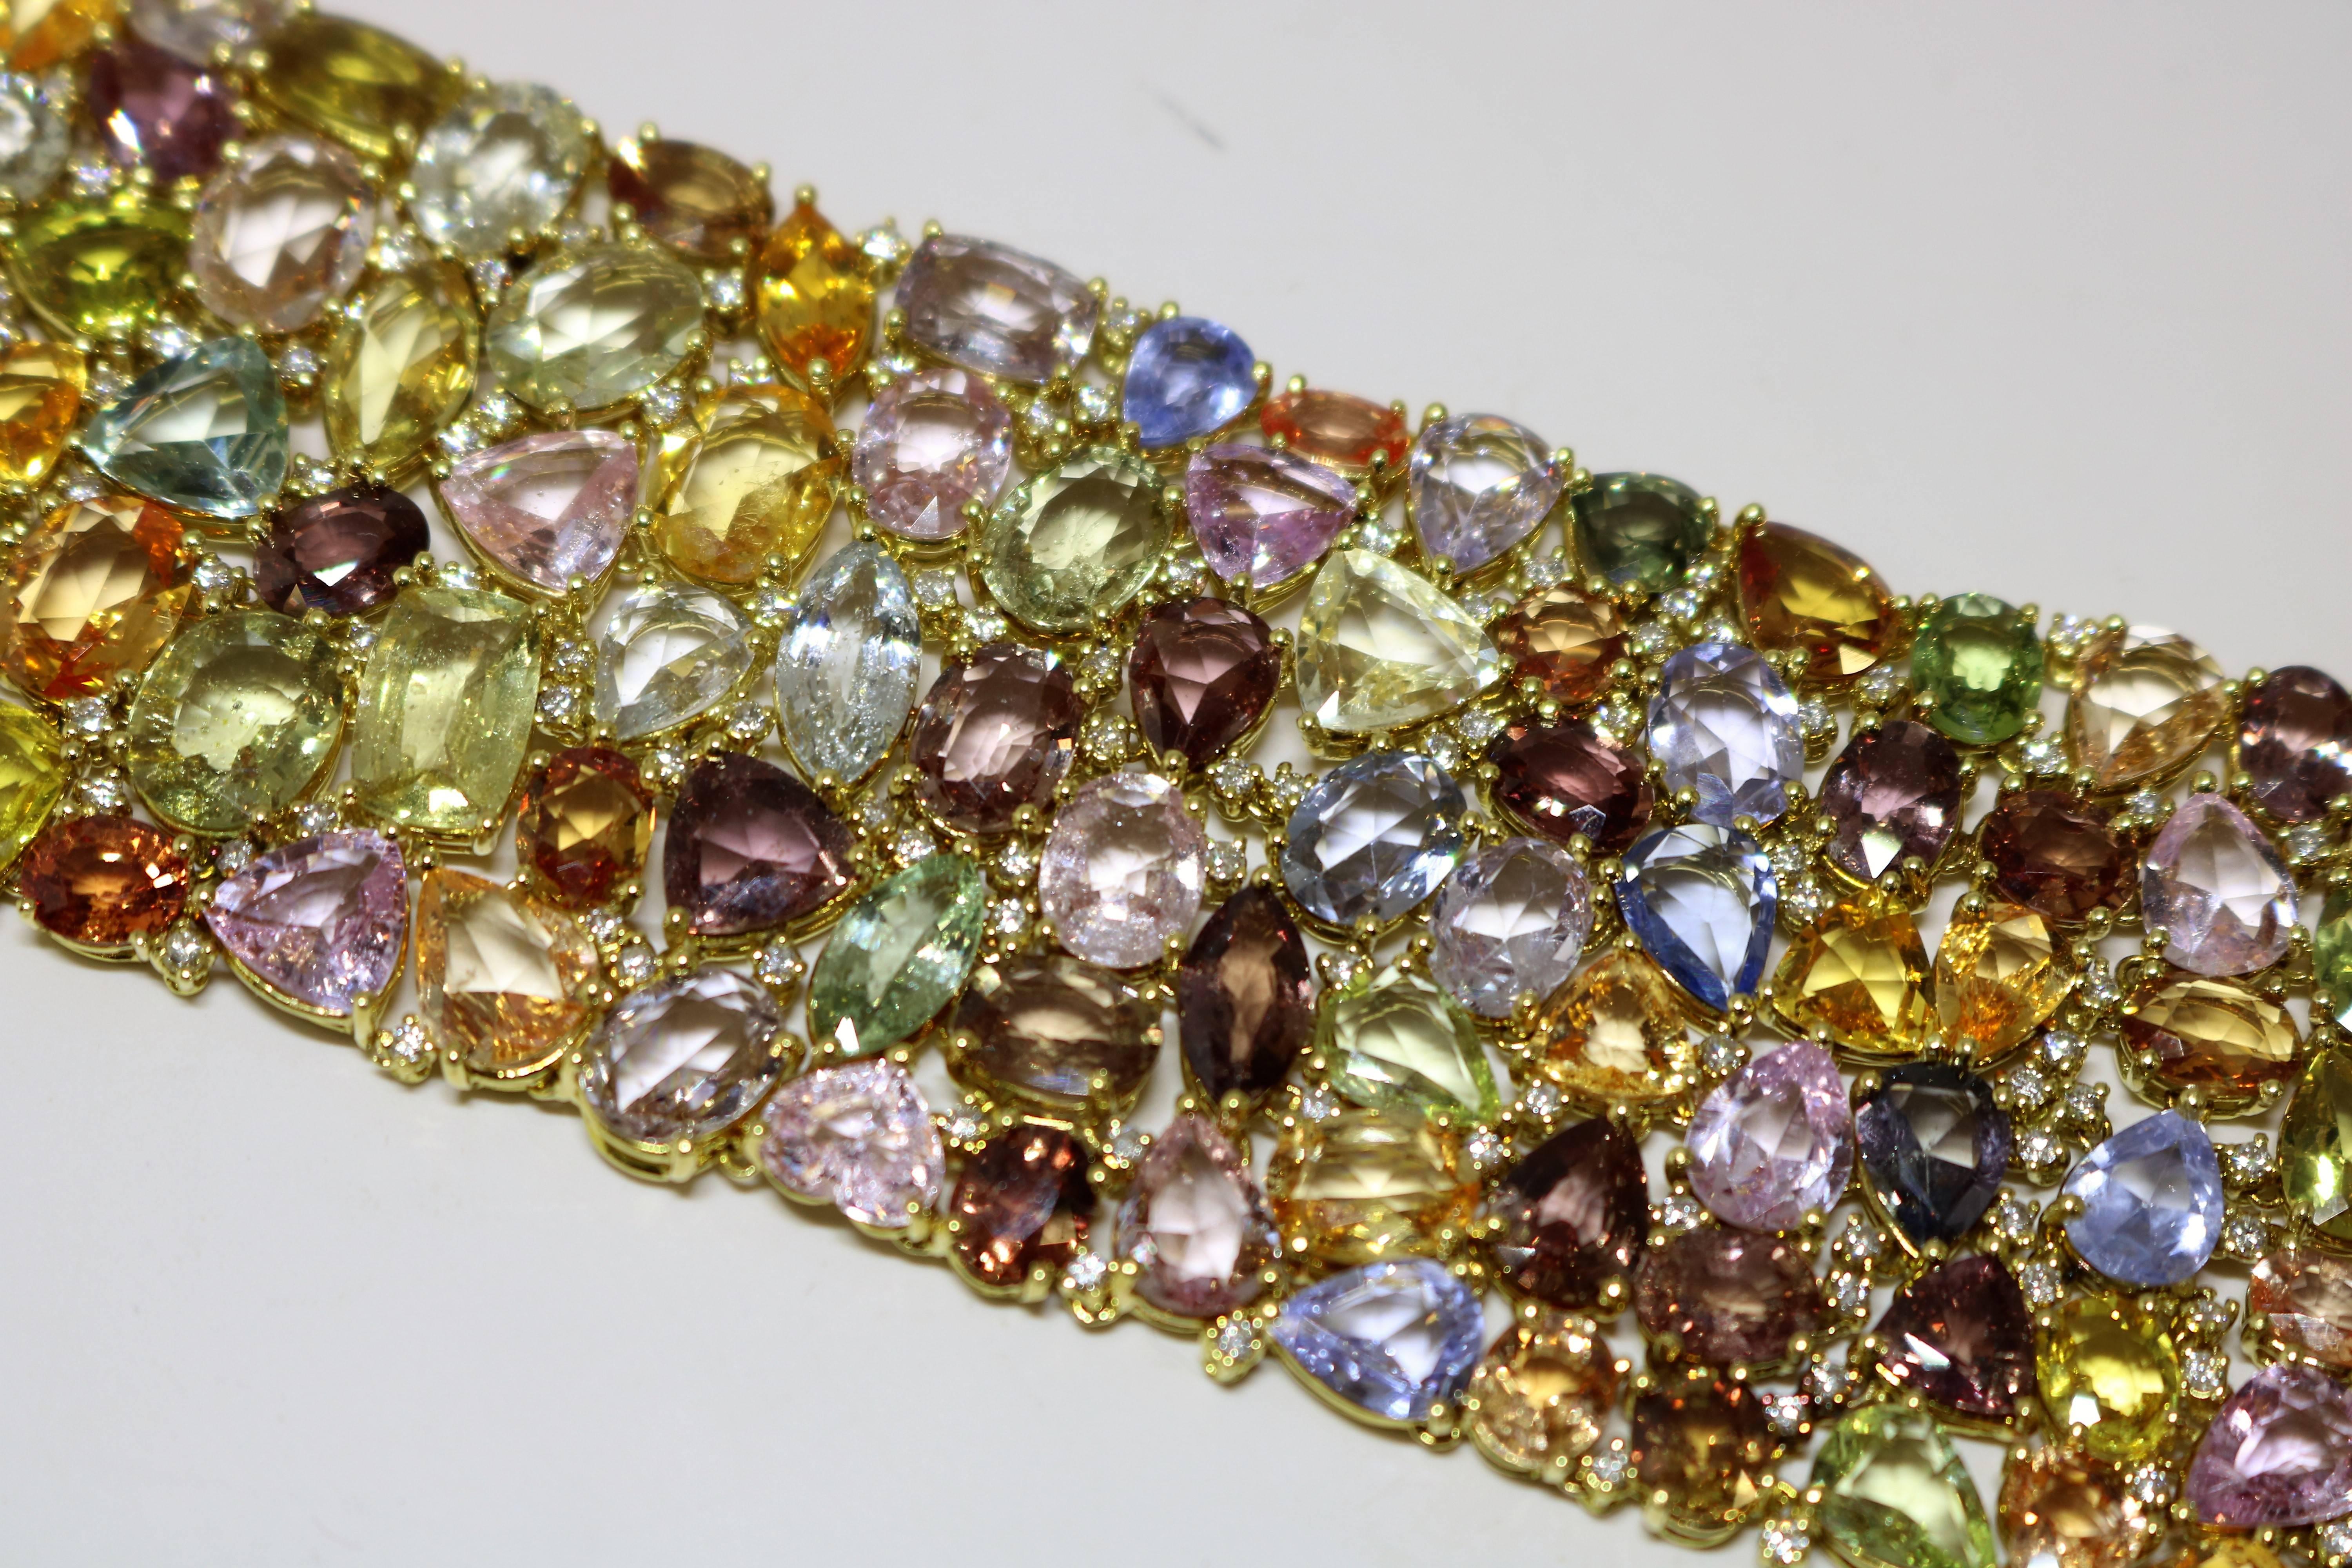 This 18k Yellow Gold Handmade mounting; 225.39 ct multicolor sapphire. genuine and 2.18 ct diamond interspersed throughout. Bracelet is 1 3/4 in width made beautifully flexible for total comfort